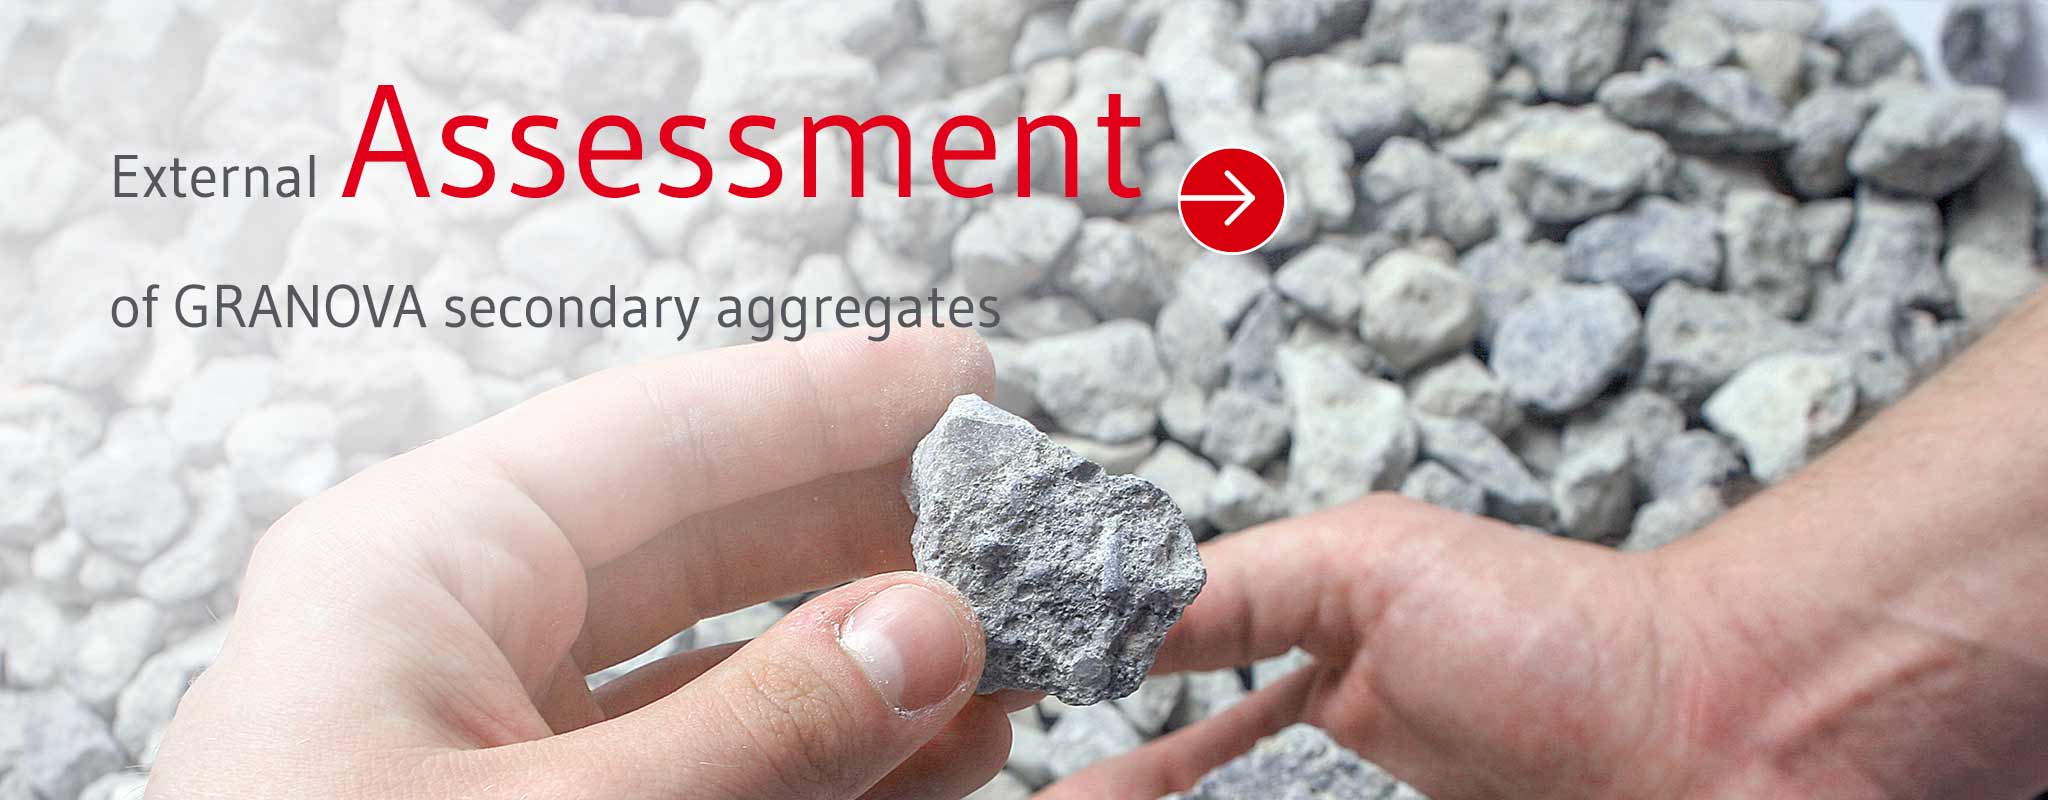 IBA: Quality is controlled for use as secondary aggregate